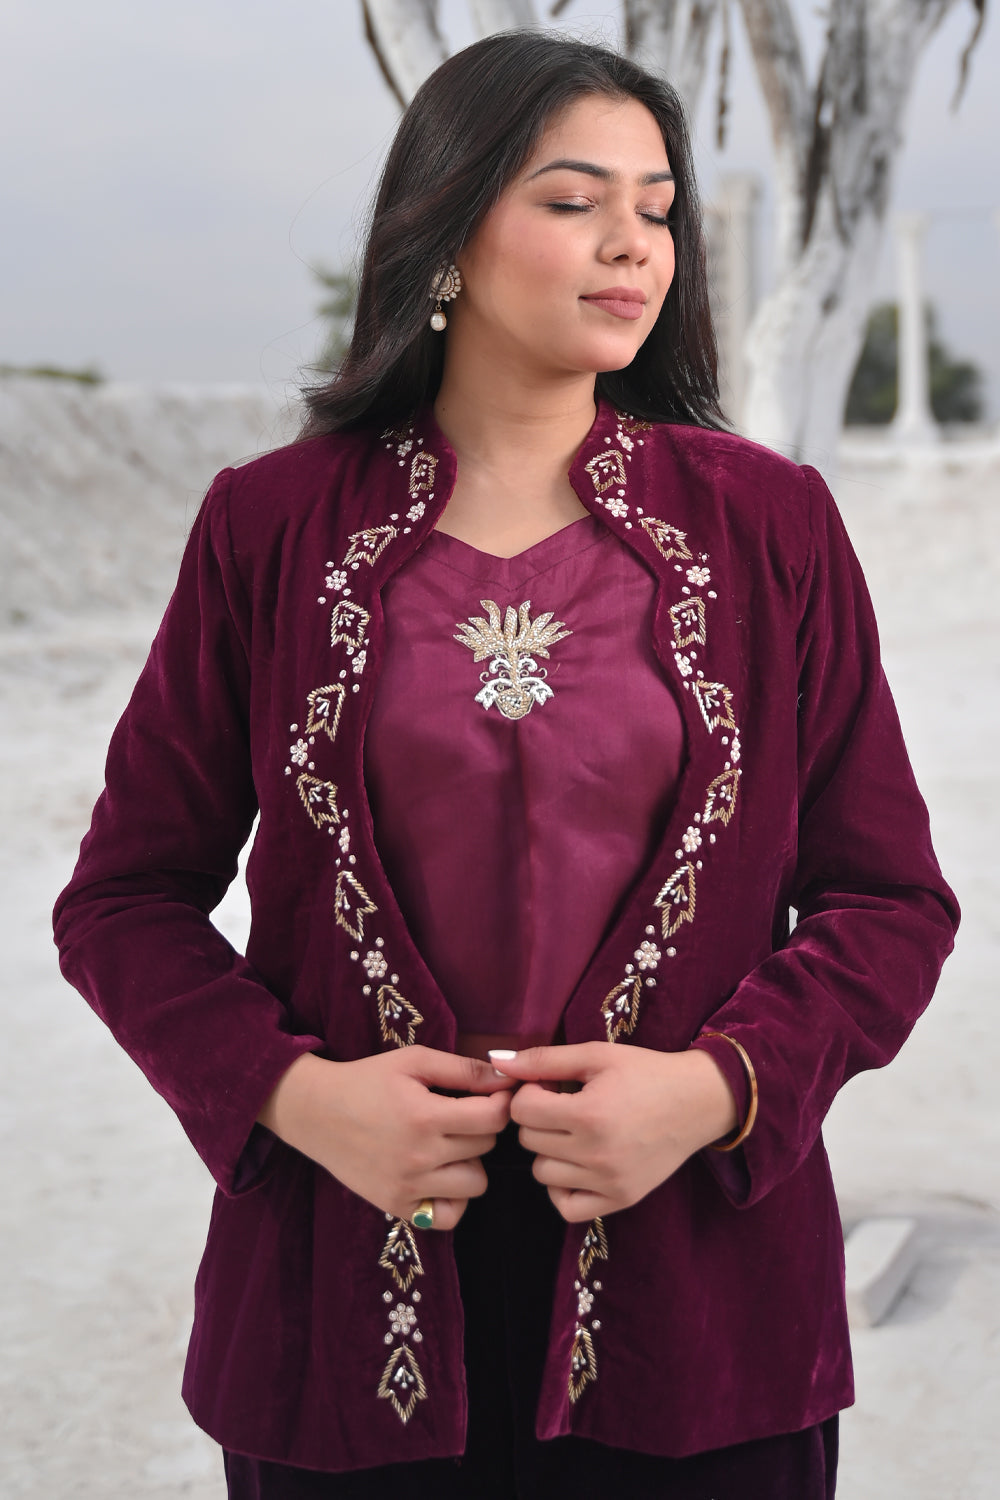 Unique Scarlet Wine Velvet Blazer with handcrafted embellishments, Made to Order. Perfect for Any Occasion!